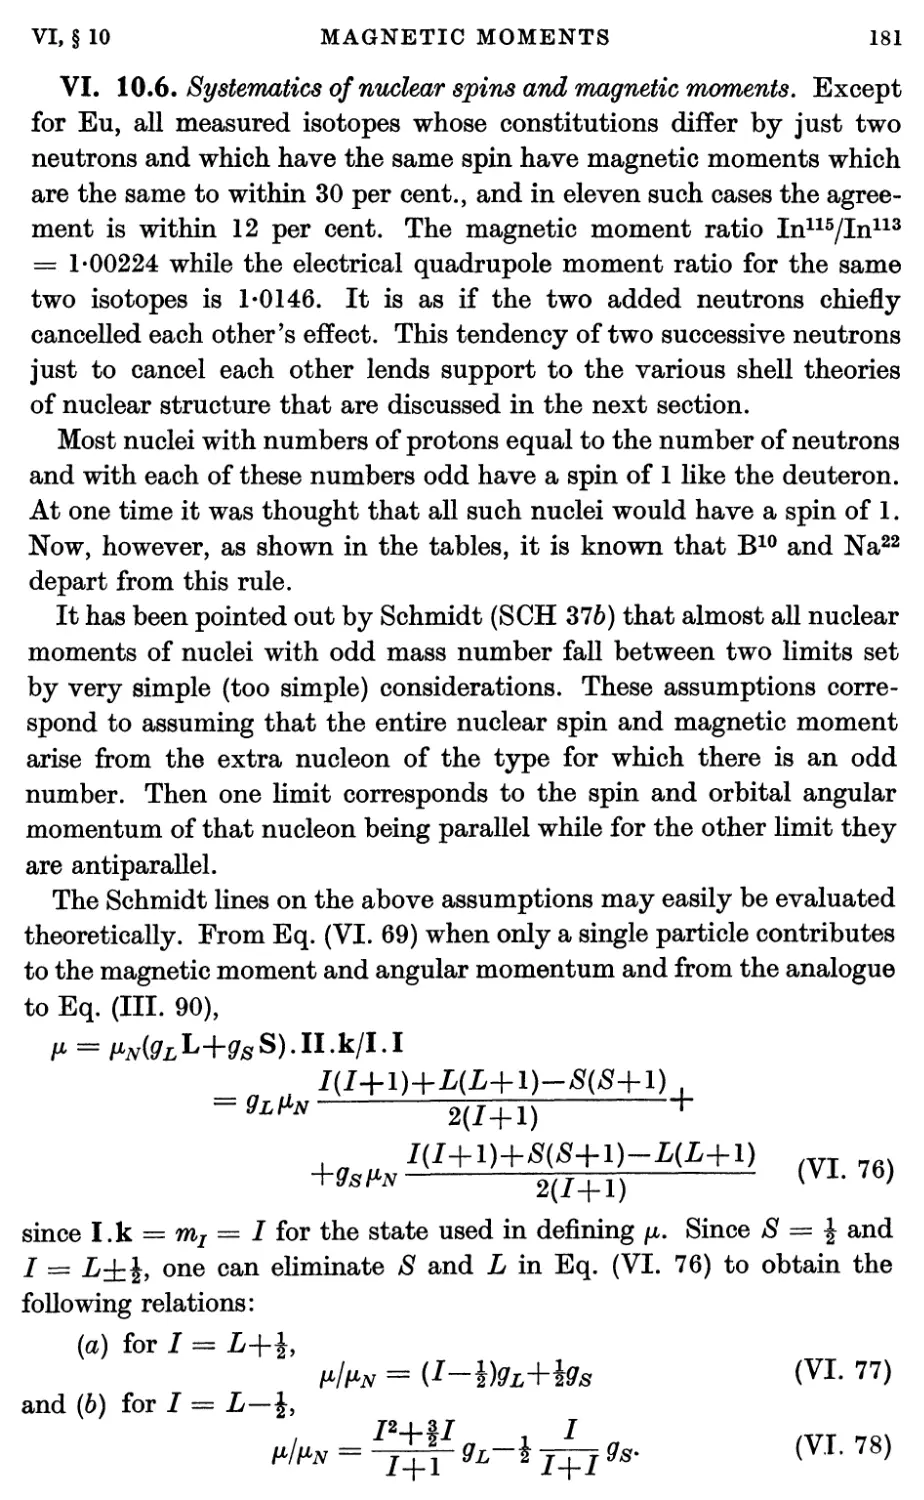 VI.10.6. Systematics of nuclear spins and magnetic moments